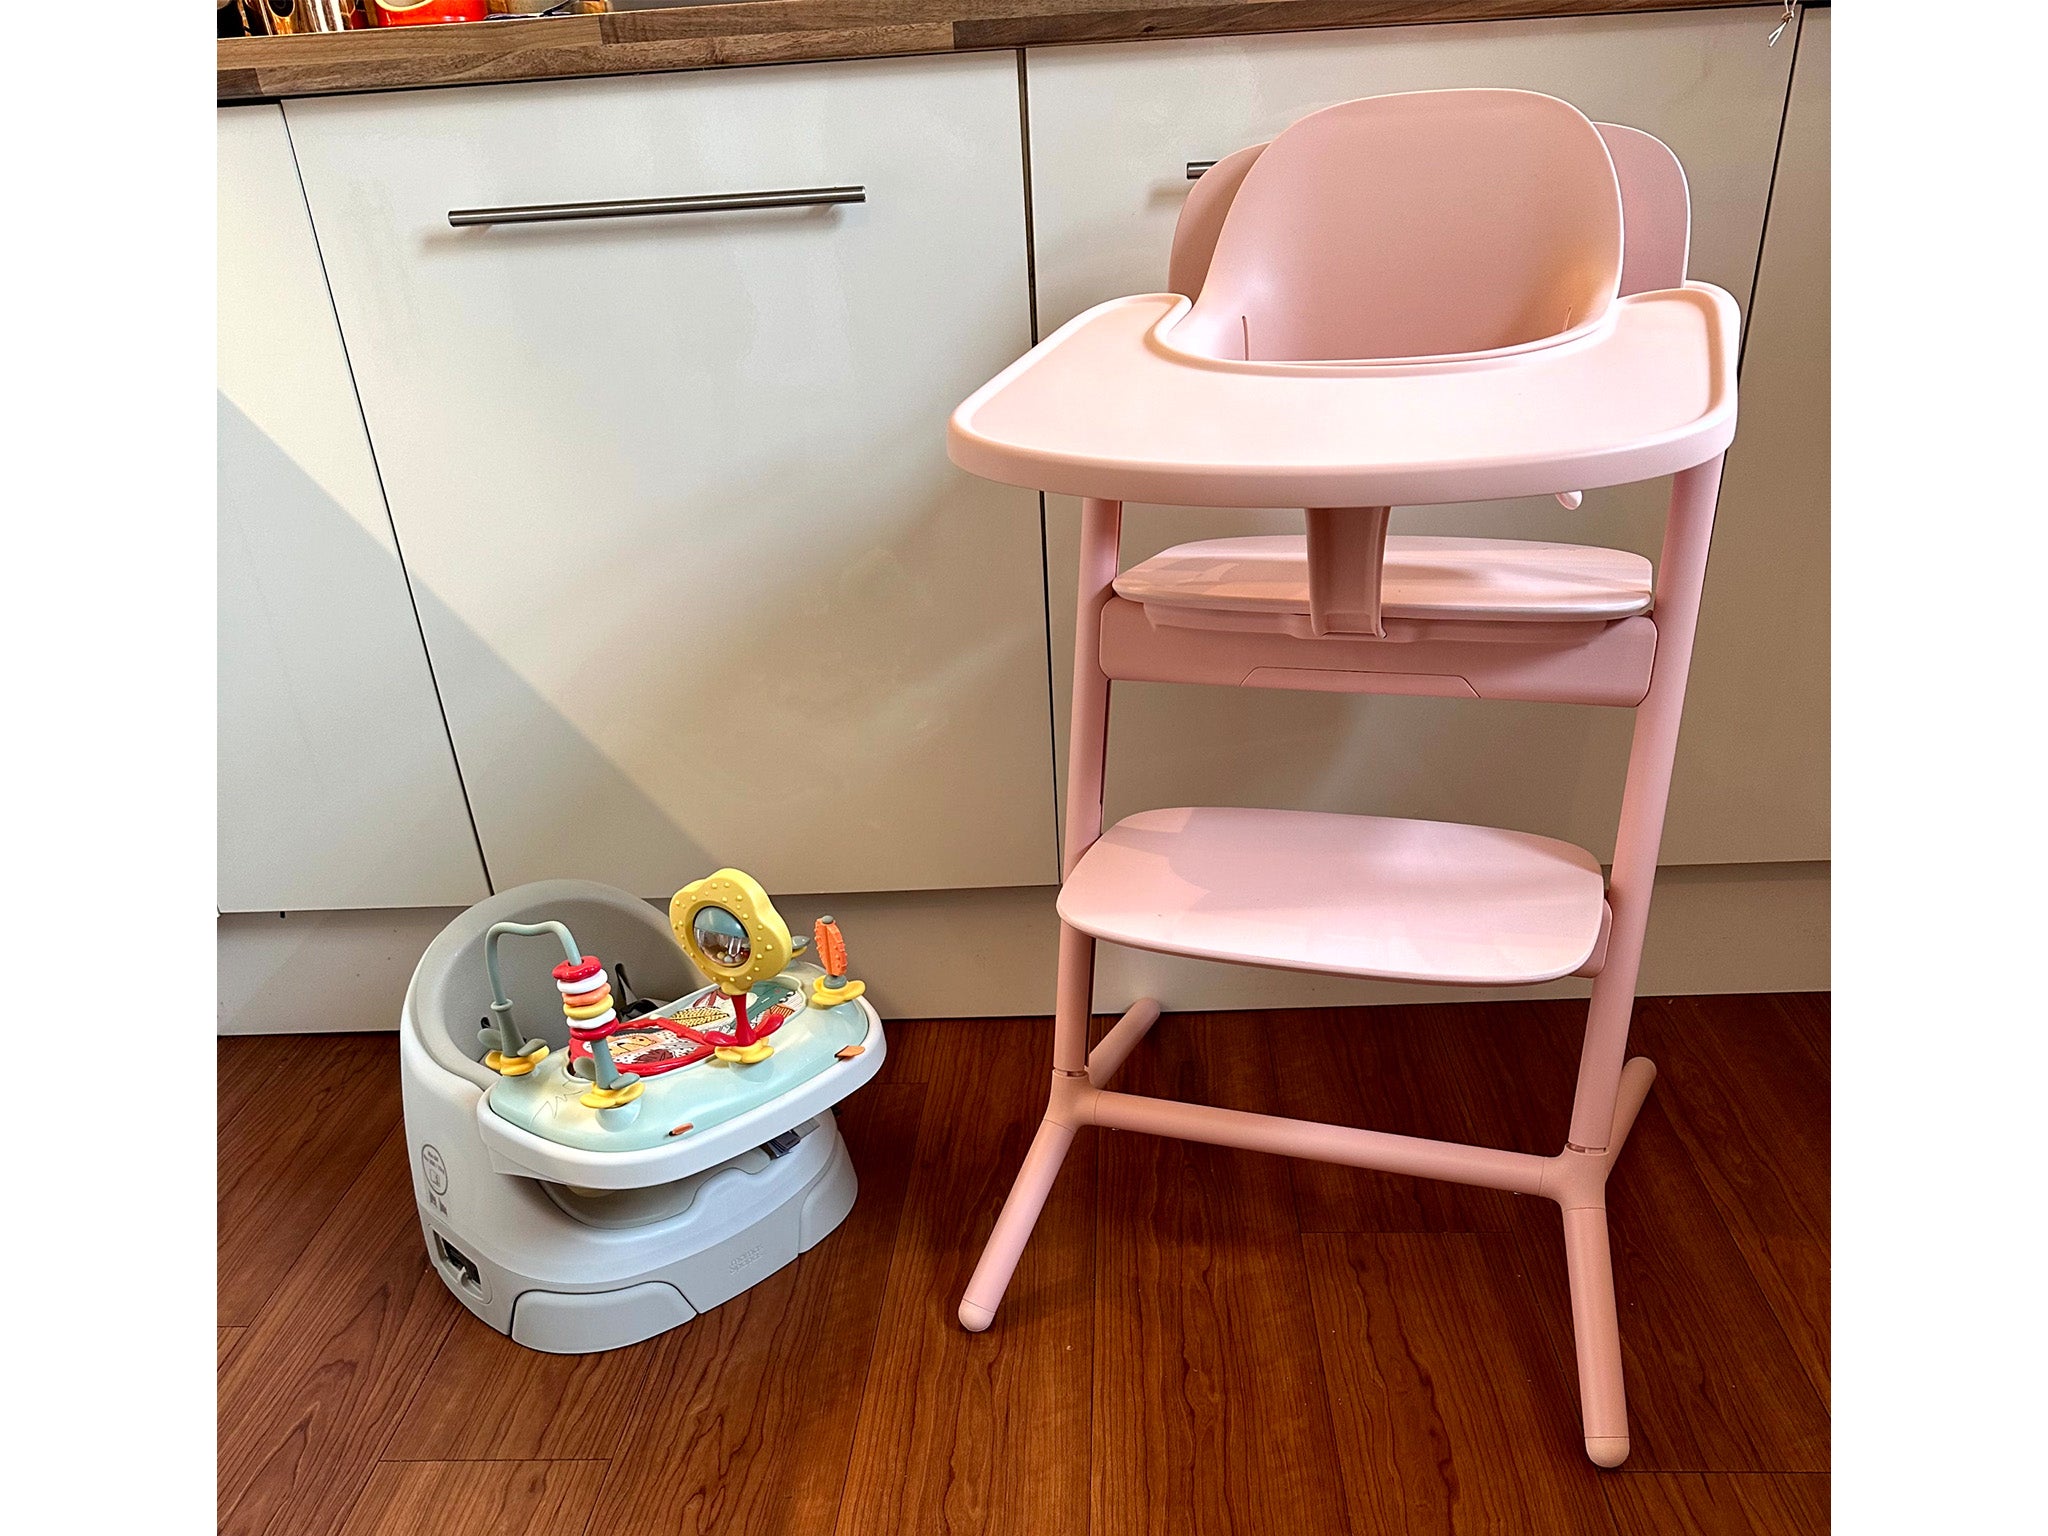 We tested a range of high chairs and booster seats